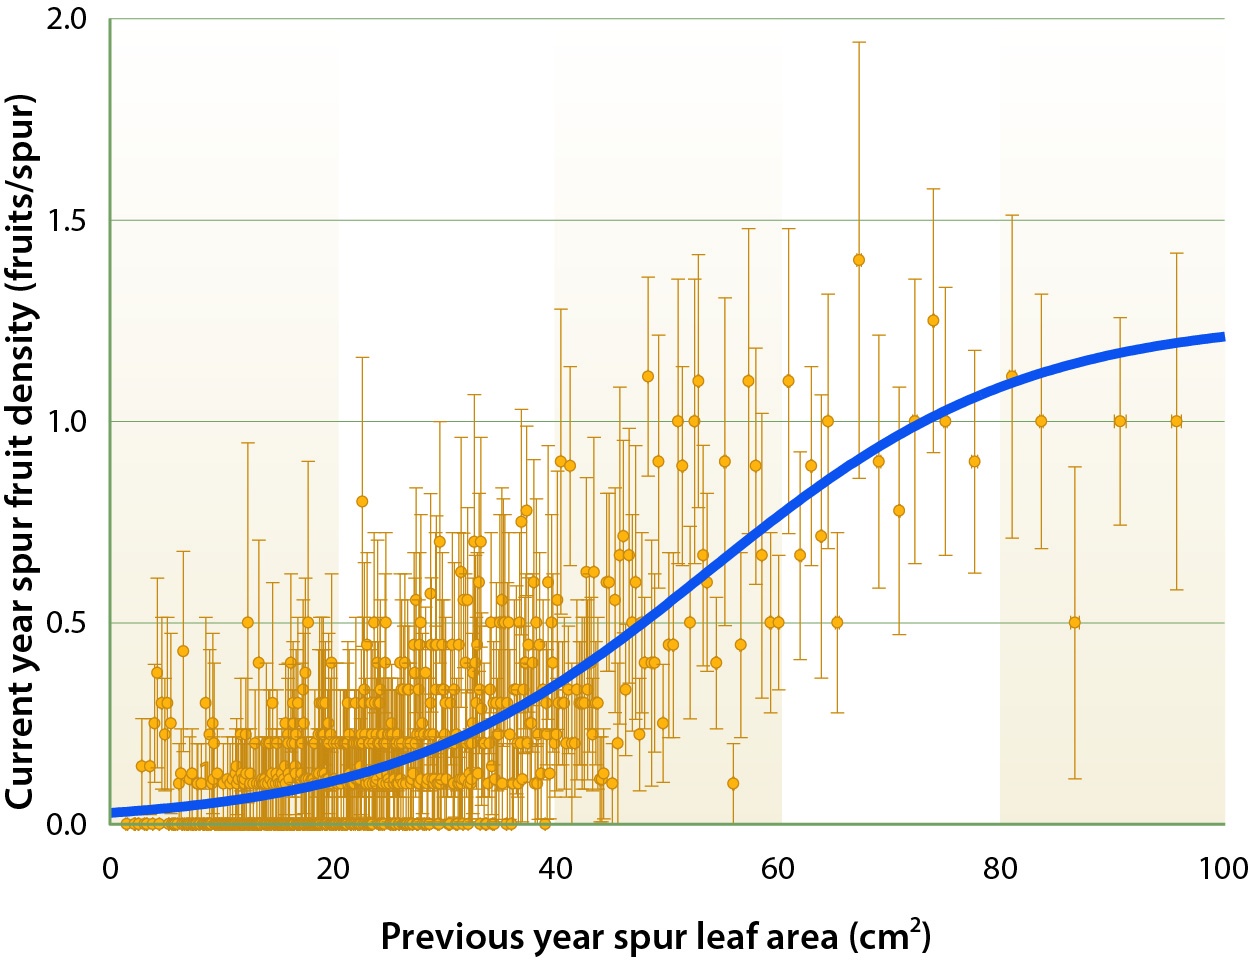 Relationship between current year spur fruit density and previous year spur leaf area on tagged spurs from 2002 to 2007 (R2 = 0.59 P < 0.0001). Each point is the mean of 10 spurs ± SE. 1 cm2 = 0.001 ft2.